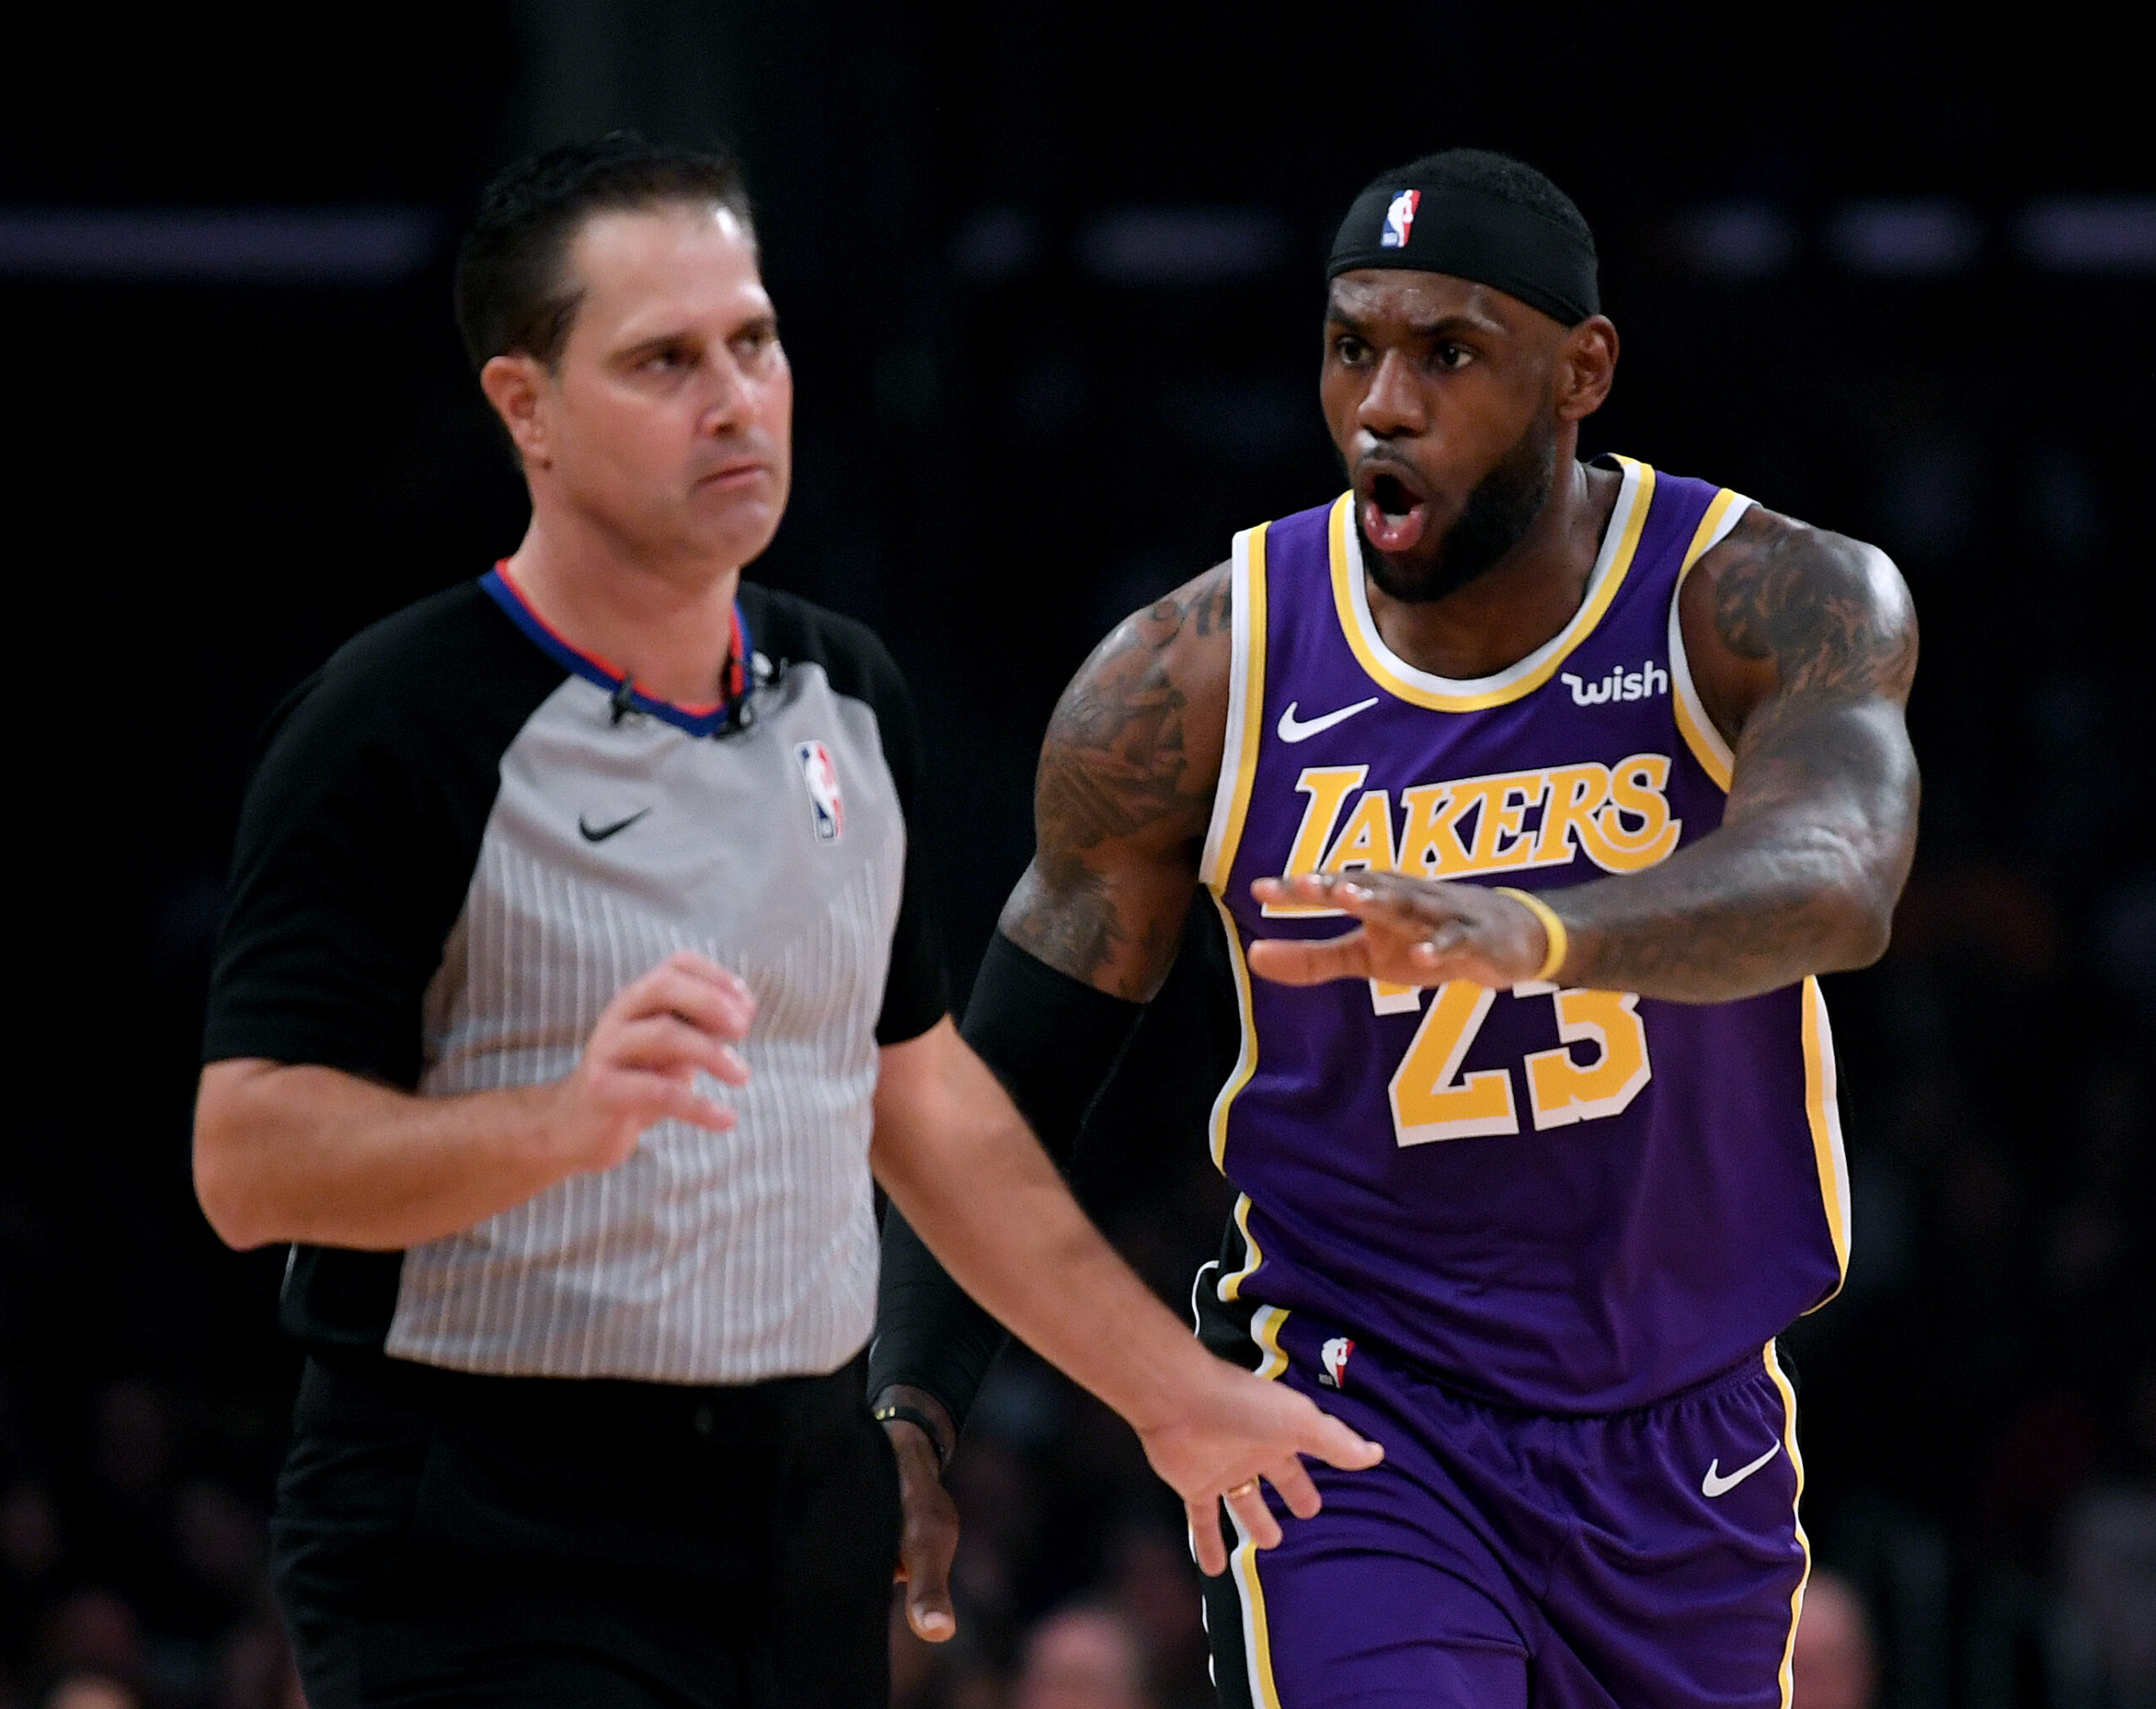 It's hard to determine an NBA referee's salary